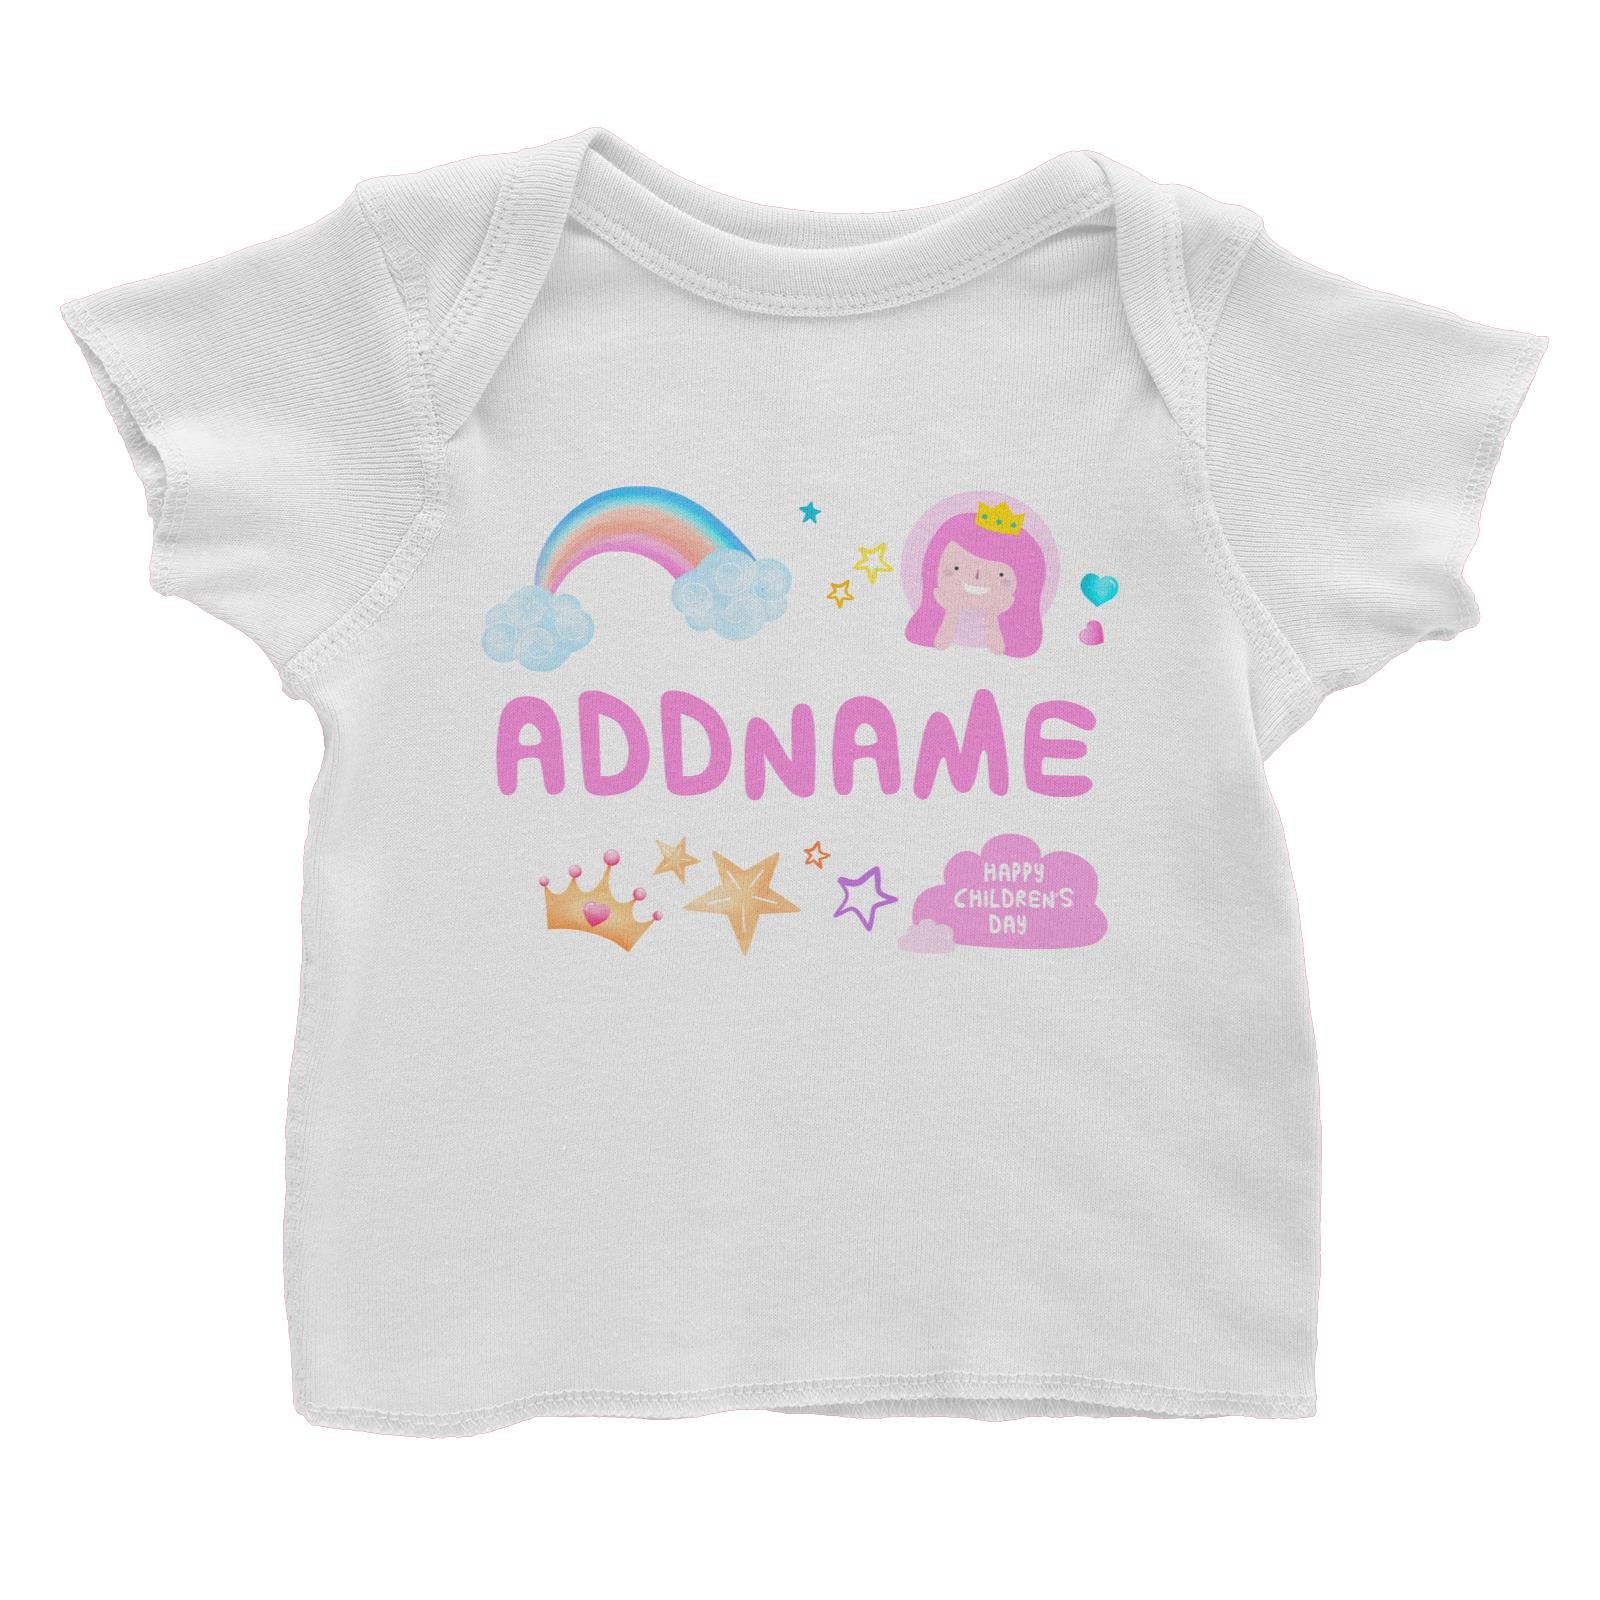 Children's Day Gift Series Cute Pink Girl Princess Rainbow Addname Baby T-Shirt